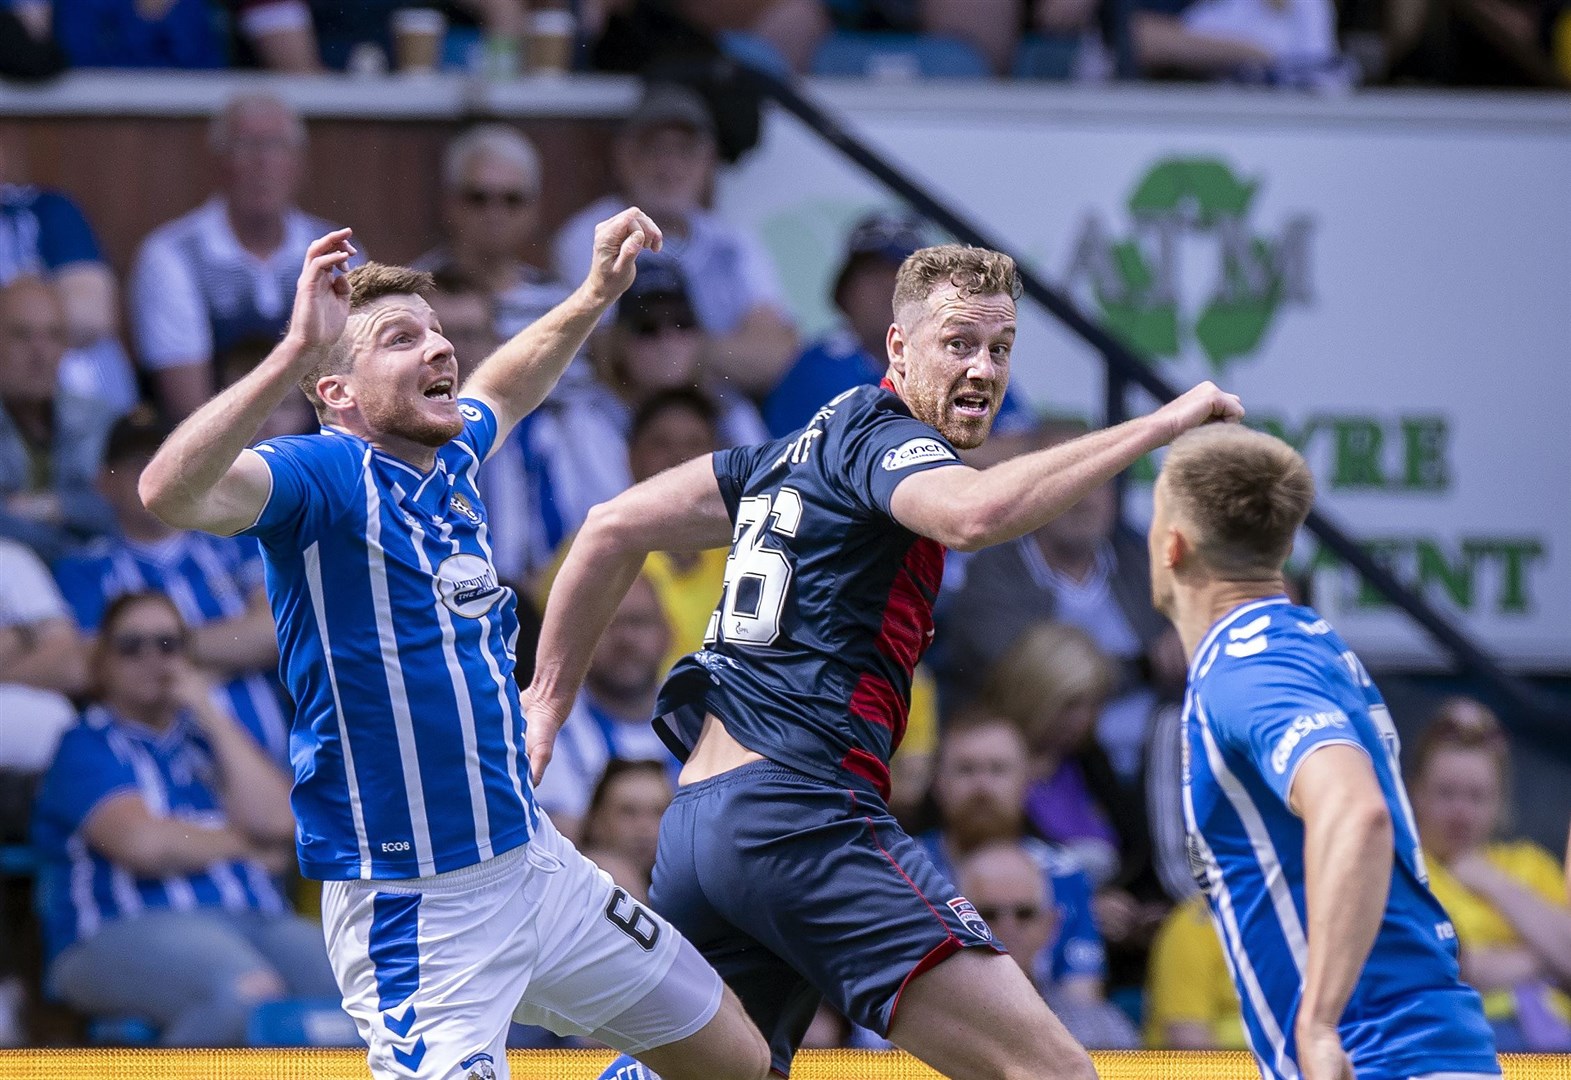 Ross County strike hero White can still make Premiership showdown with Partick Thistle